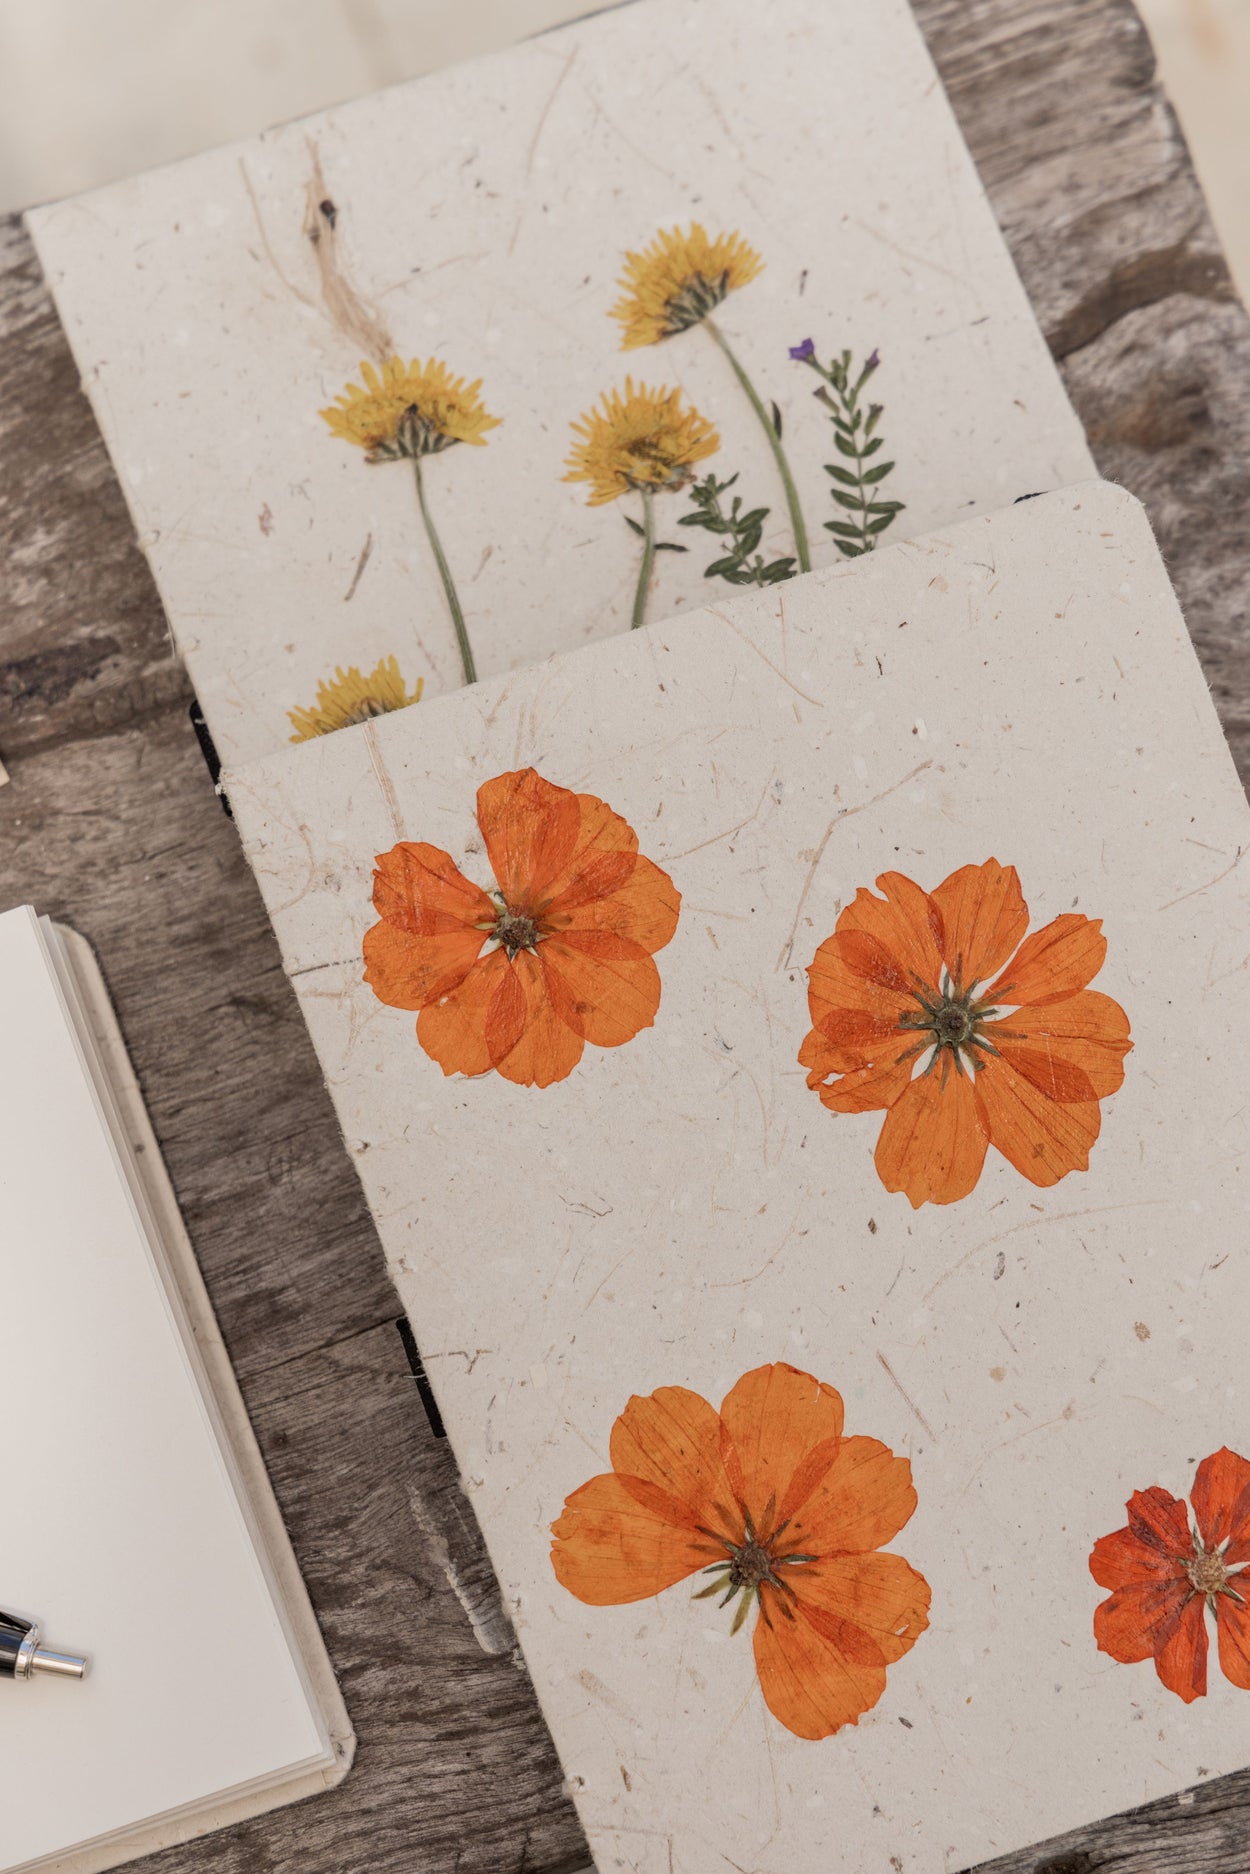 PREORDER Handcrafted Journal with Pressed Flowers 5x8